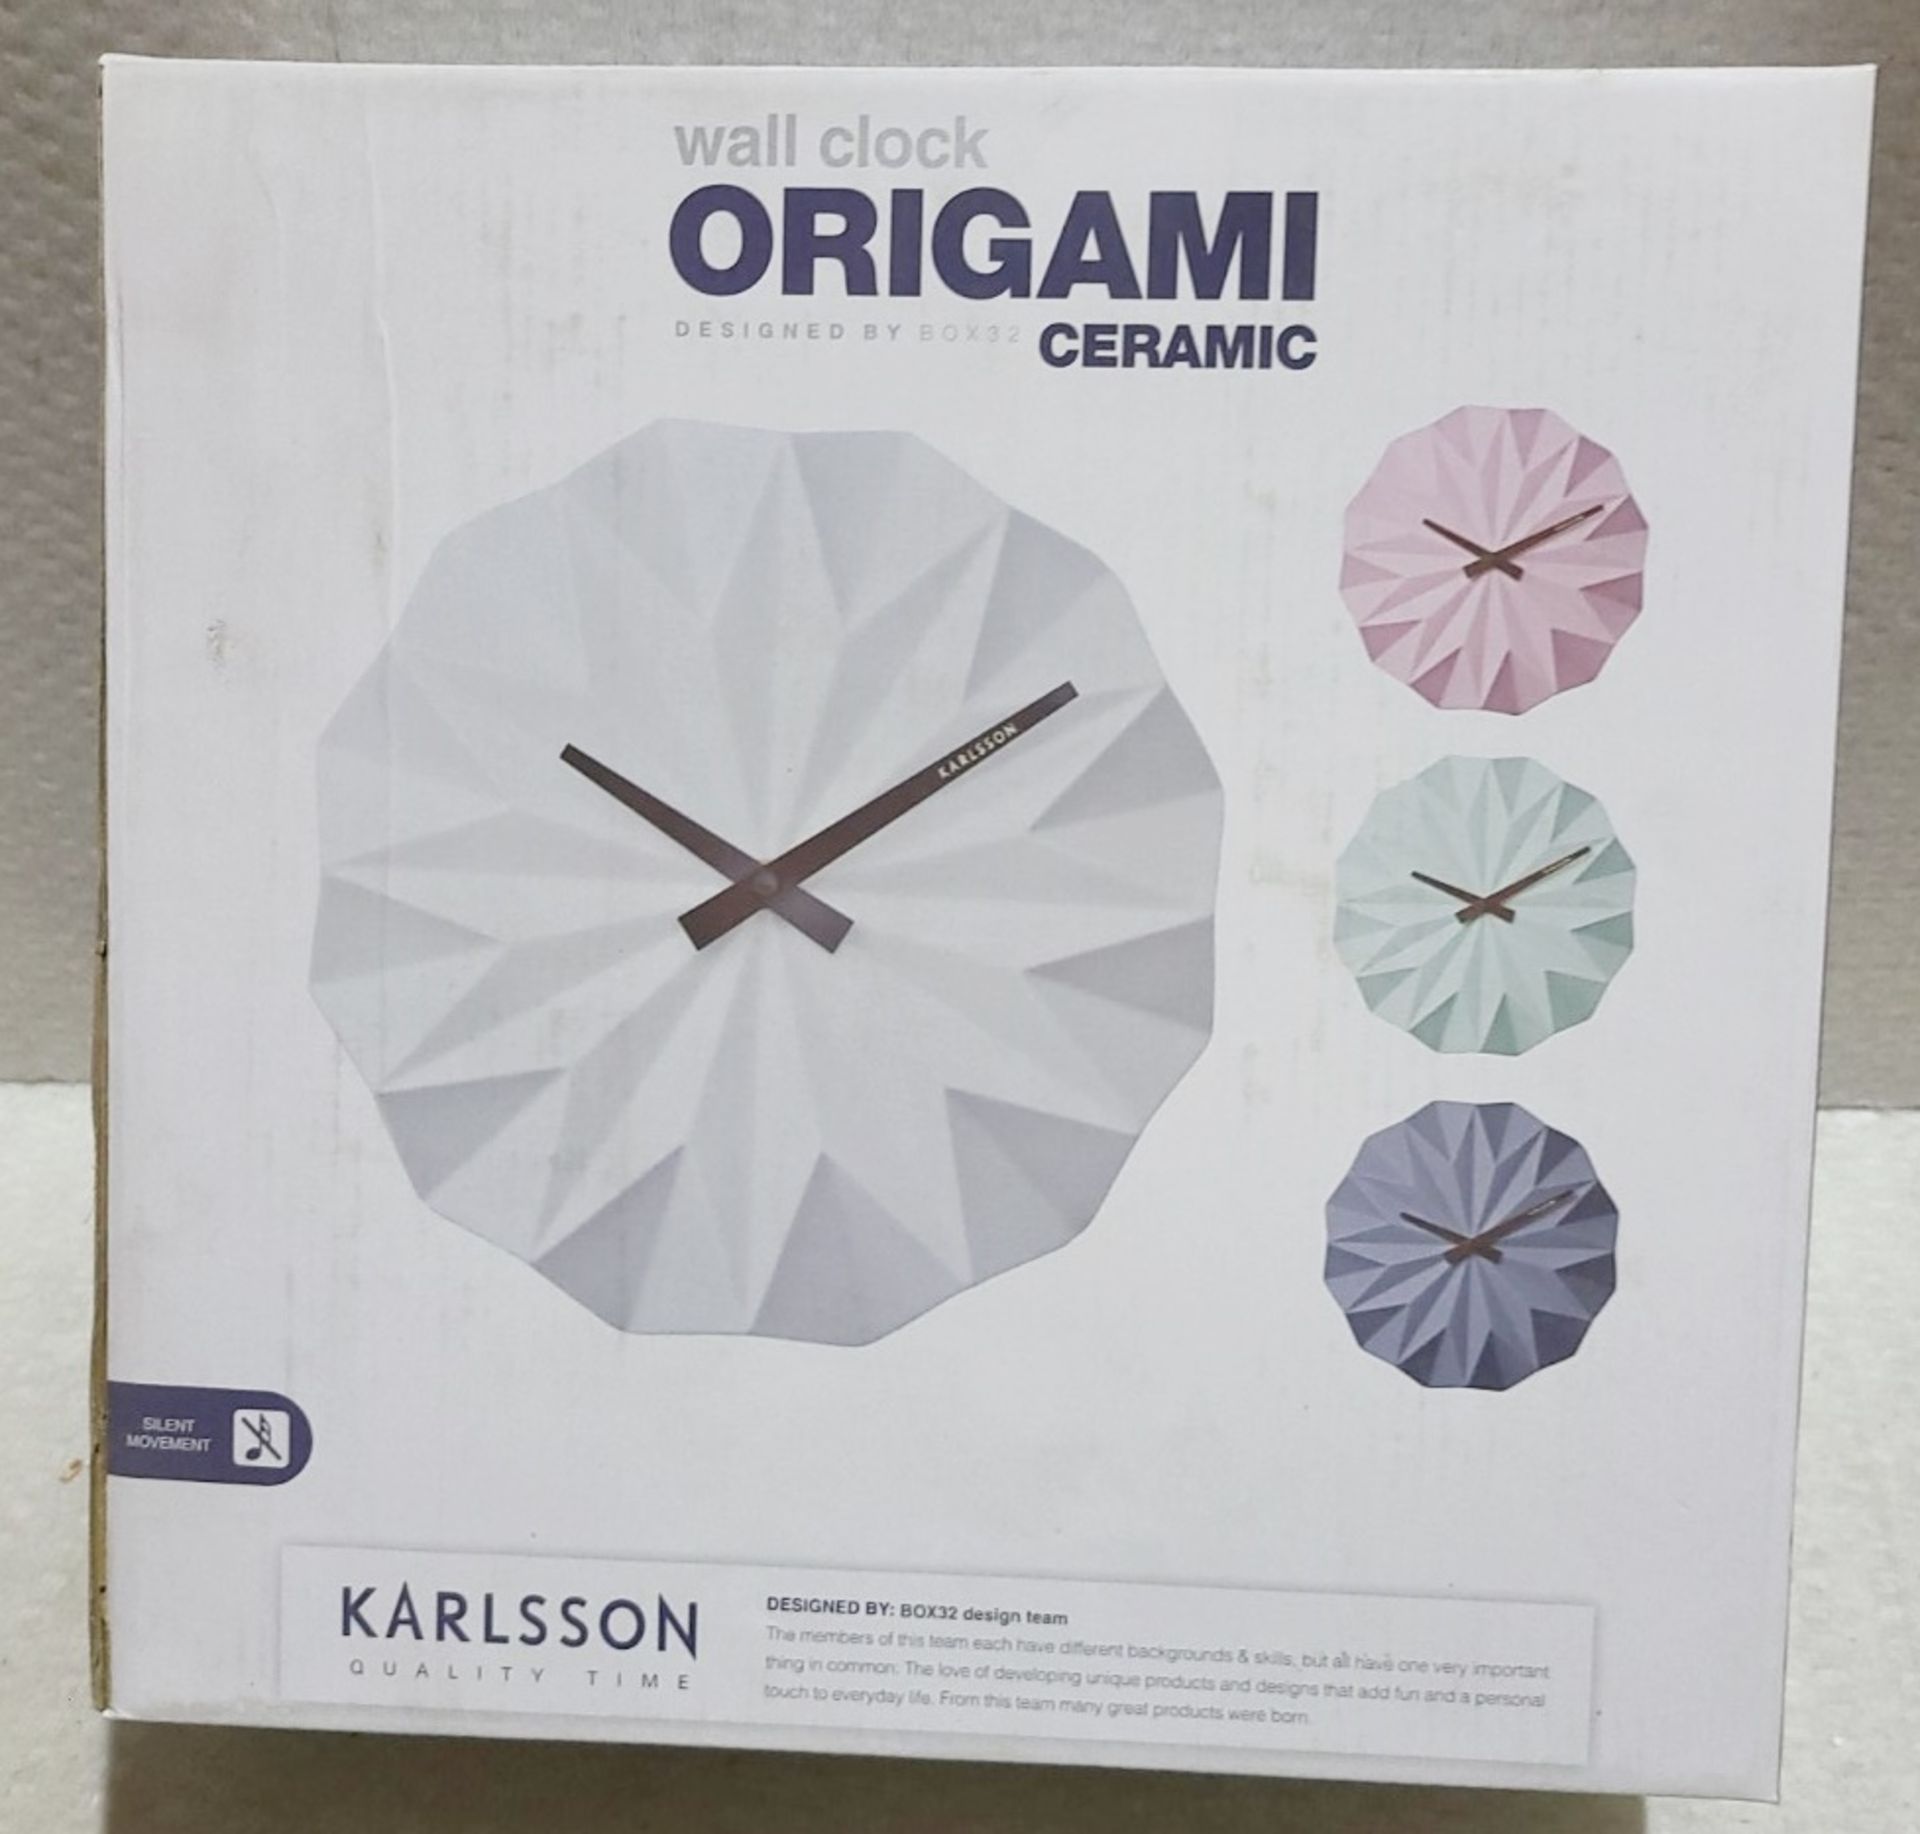 1 x KARLSSON Contemporary Origami Ceramic Silent Grey Wall Clock 27cm - New Boxed Stock - Image 4 of 6